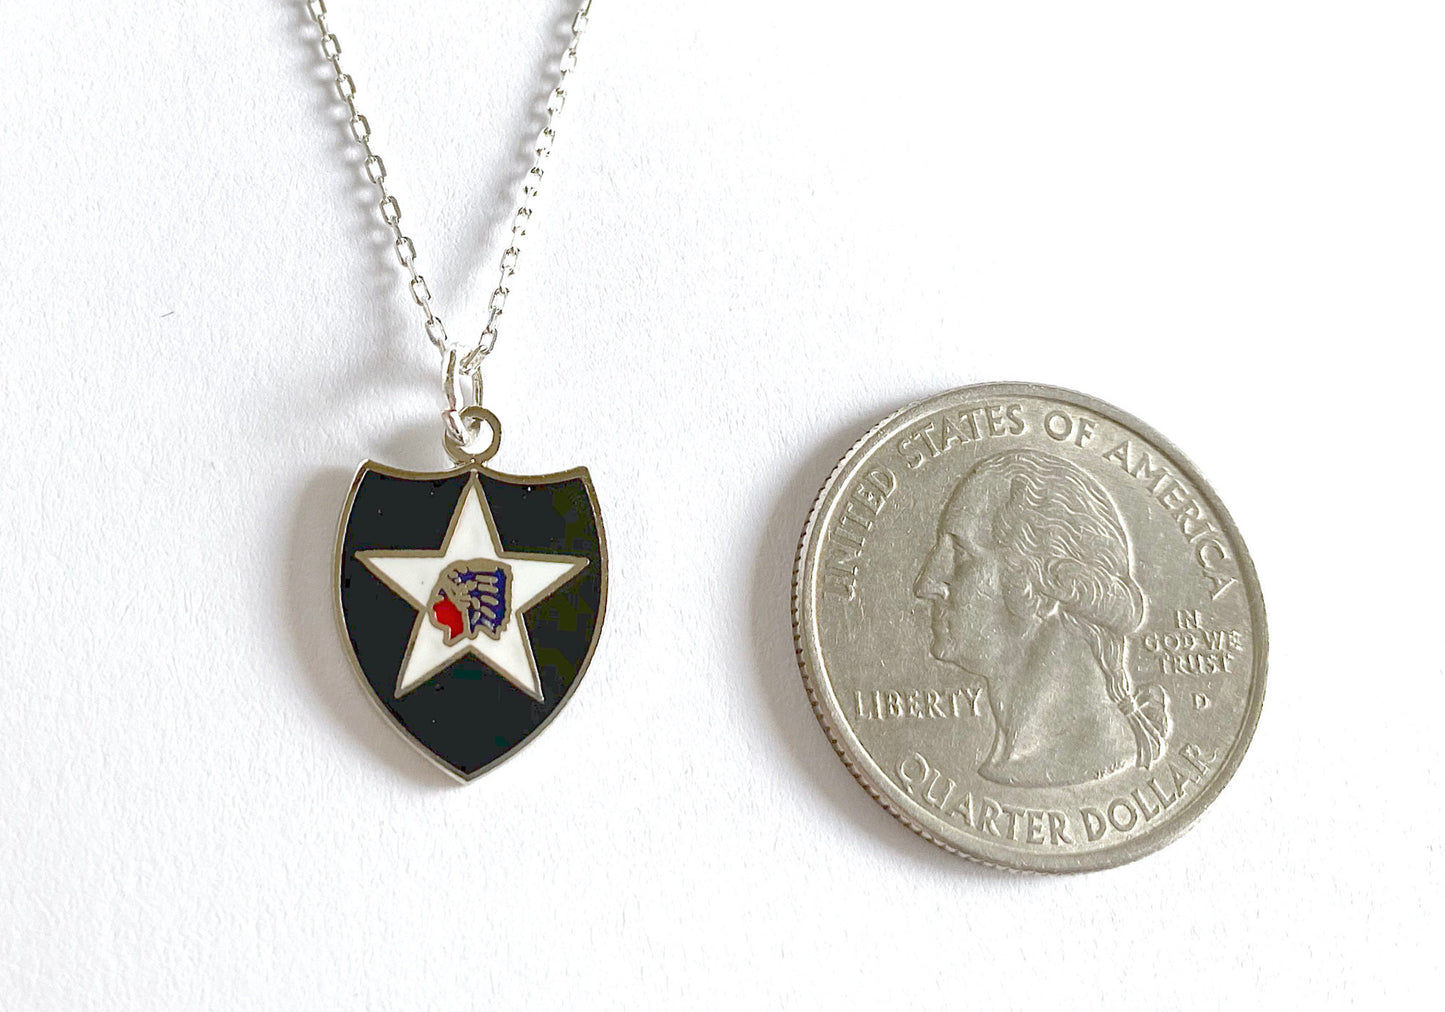 Jewelry Bar | 2nd Infantry Division - Army Unit Charm